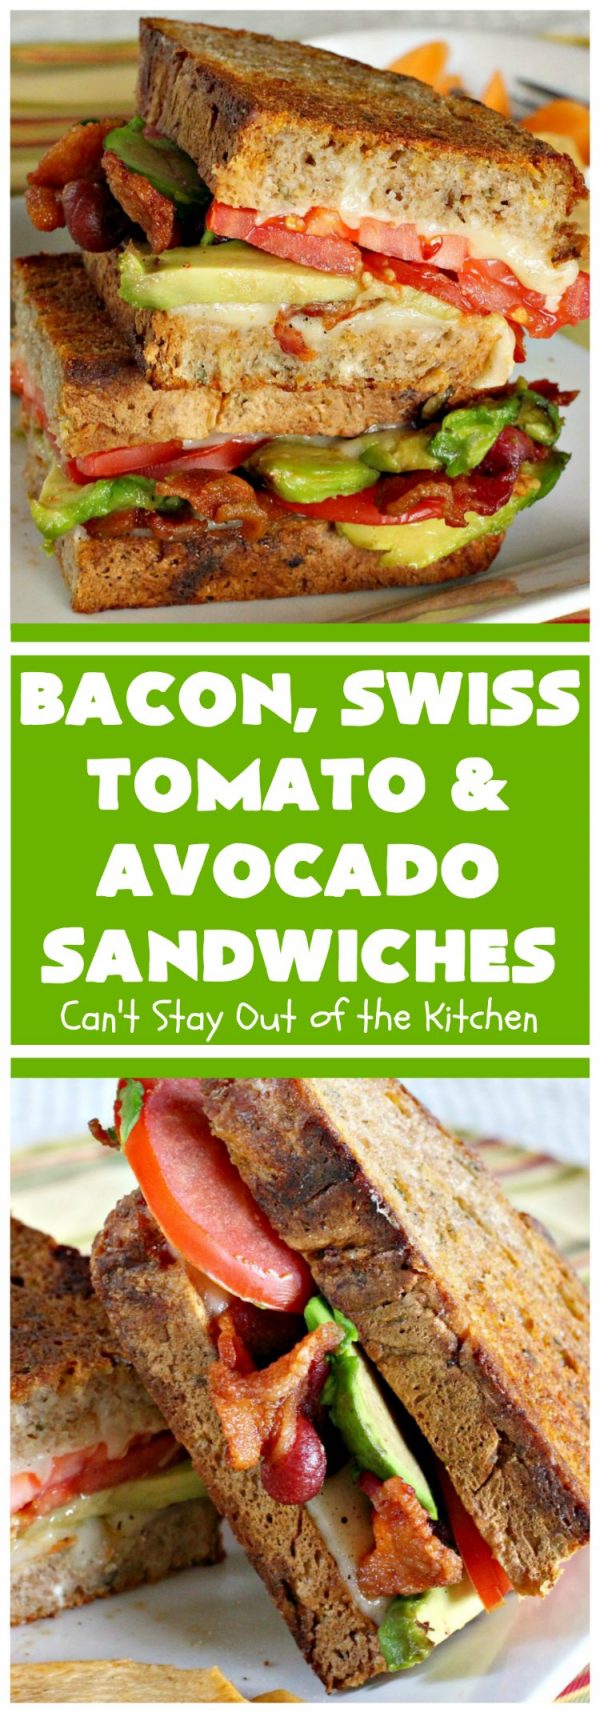 Bacon, Swiss, Tomato and Avocado Sandwiches – Can't Stay Out of the Kitchen